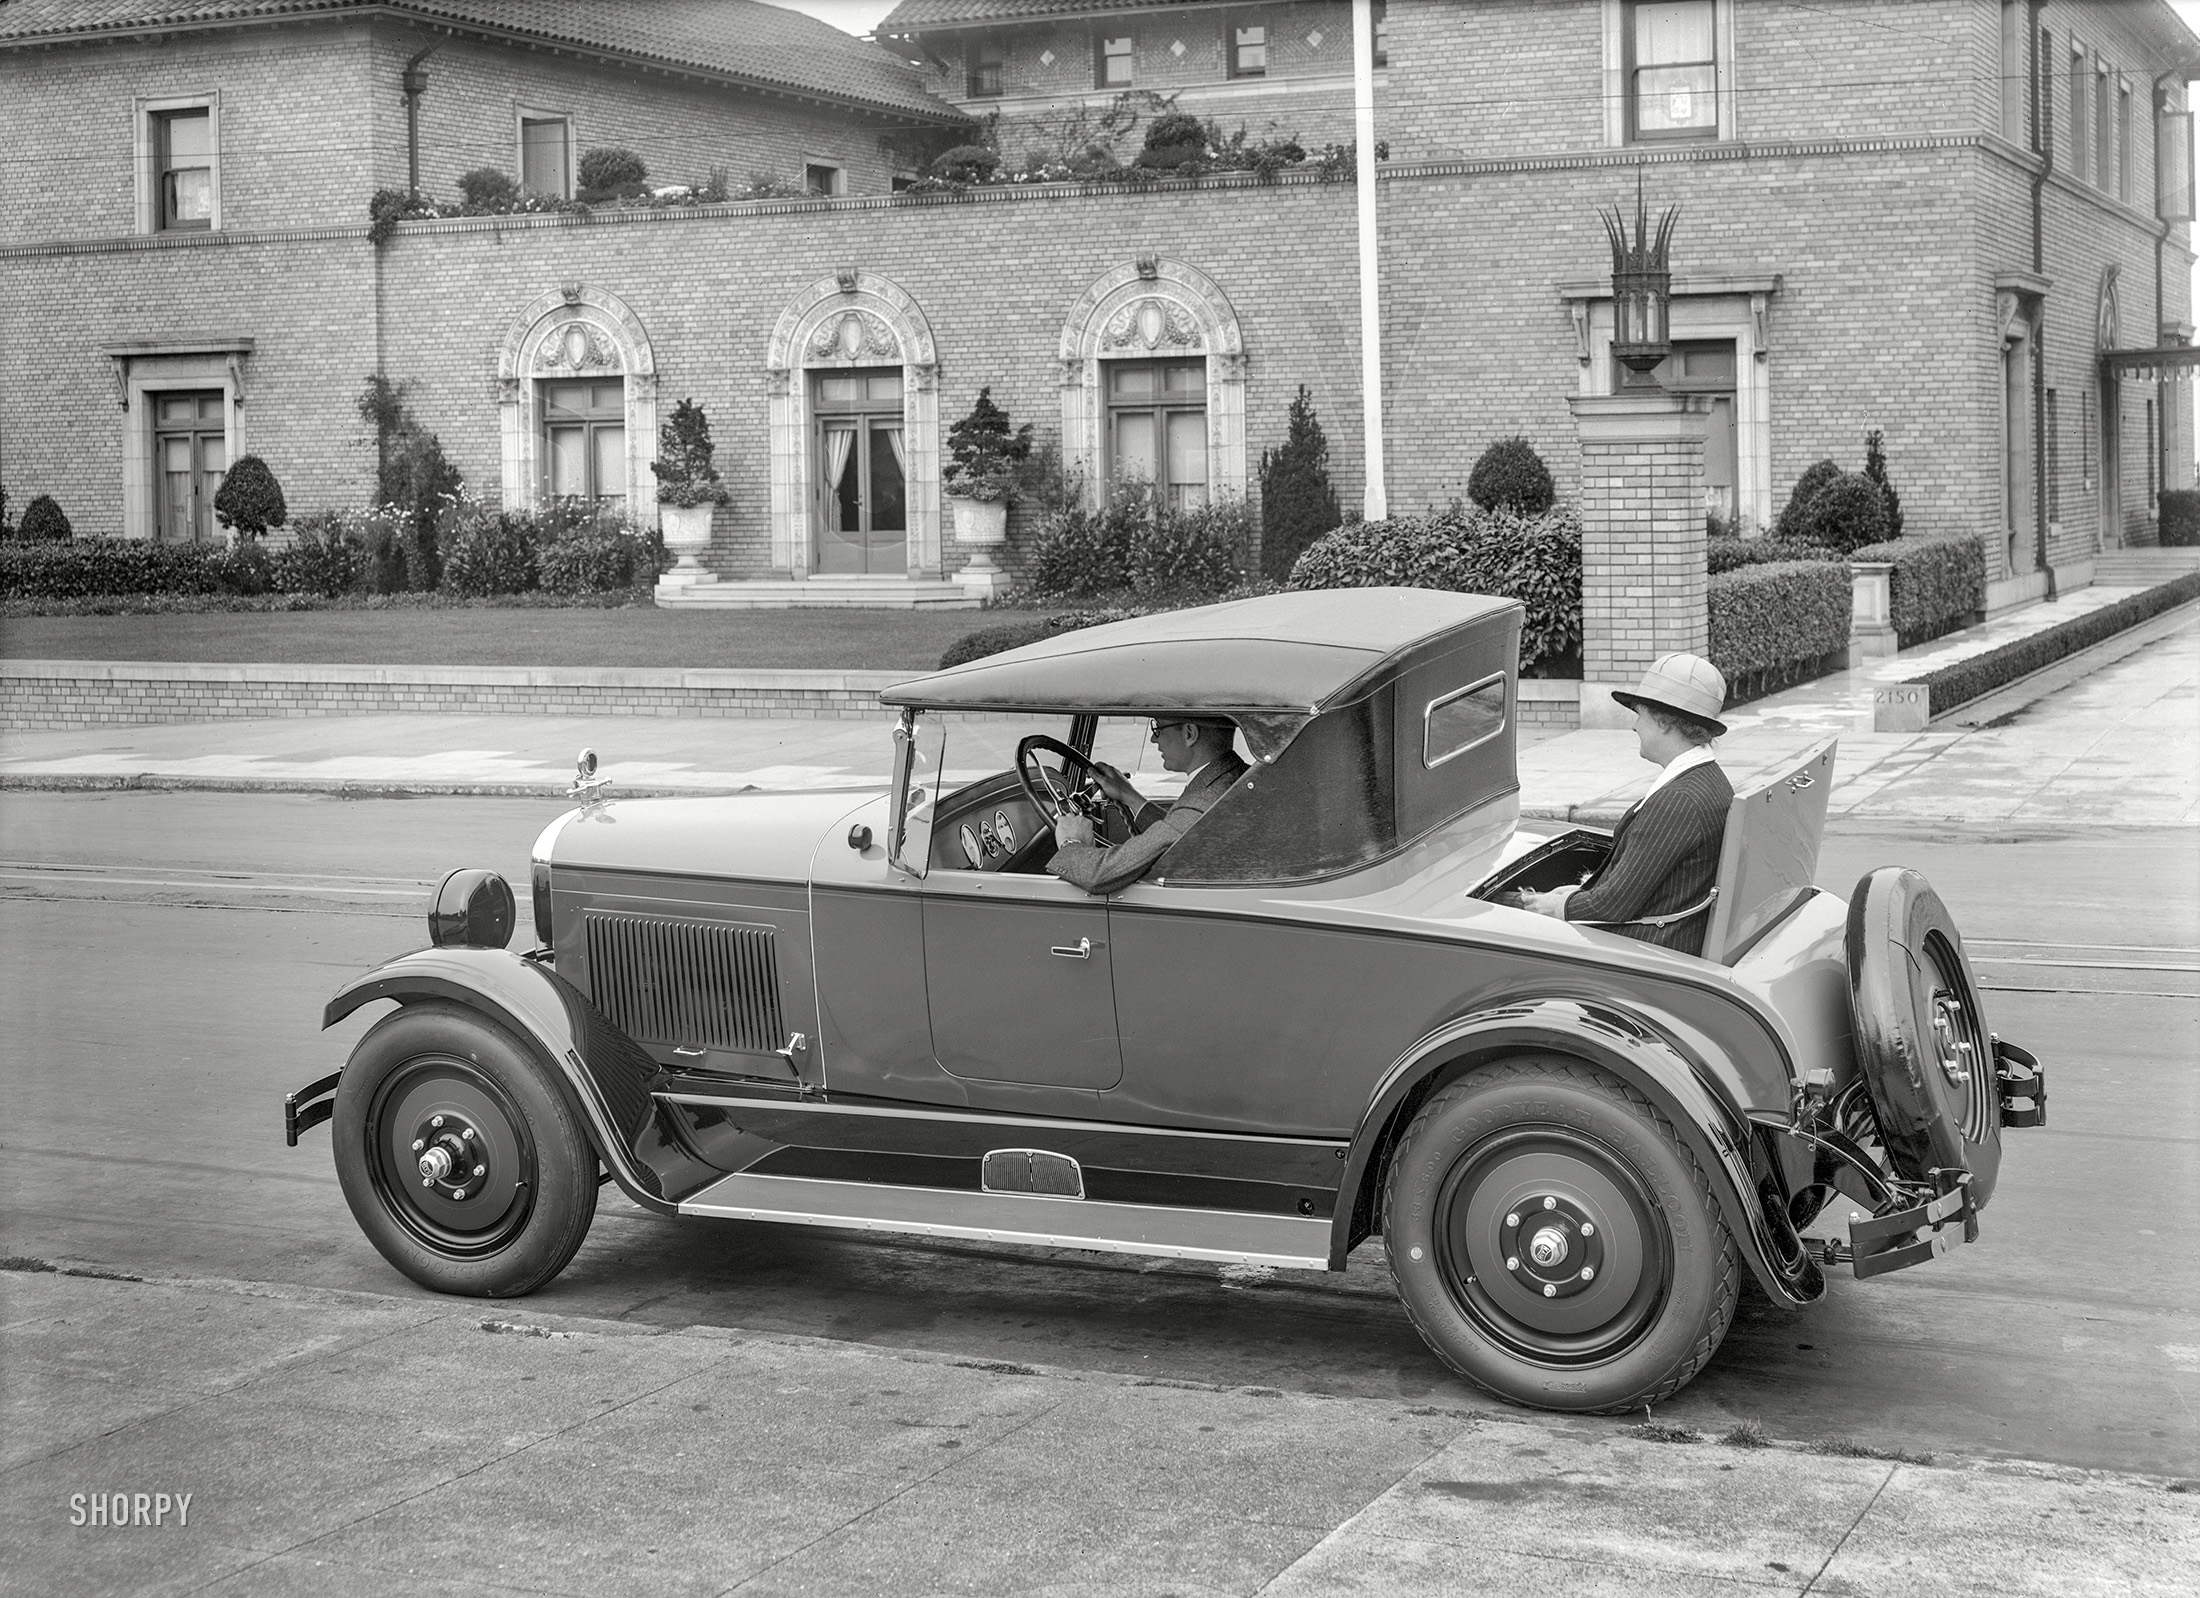 San Francisco circa 1926. "Nash Special Six rumble seat roadster at Phelan mansion." 5x7 glass negative by Christopher Helin. View full size.